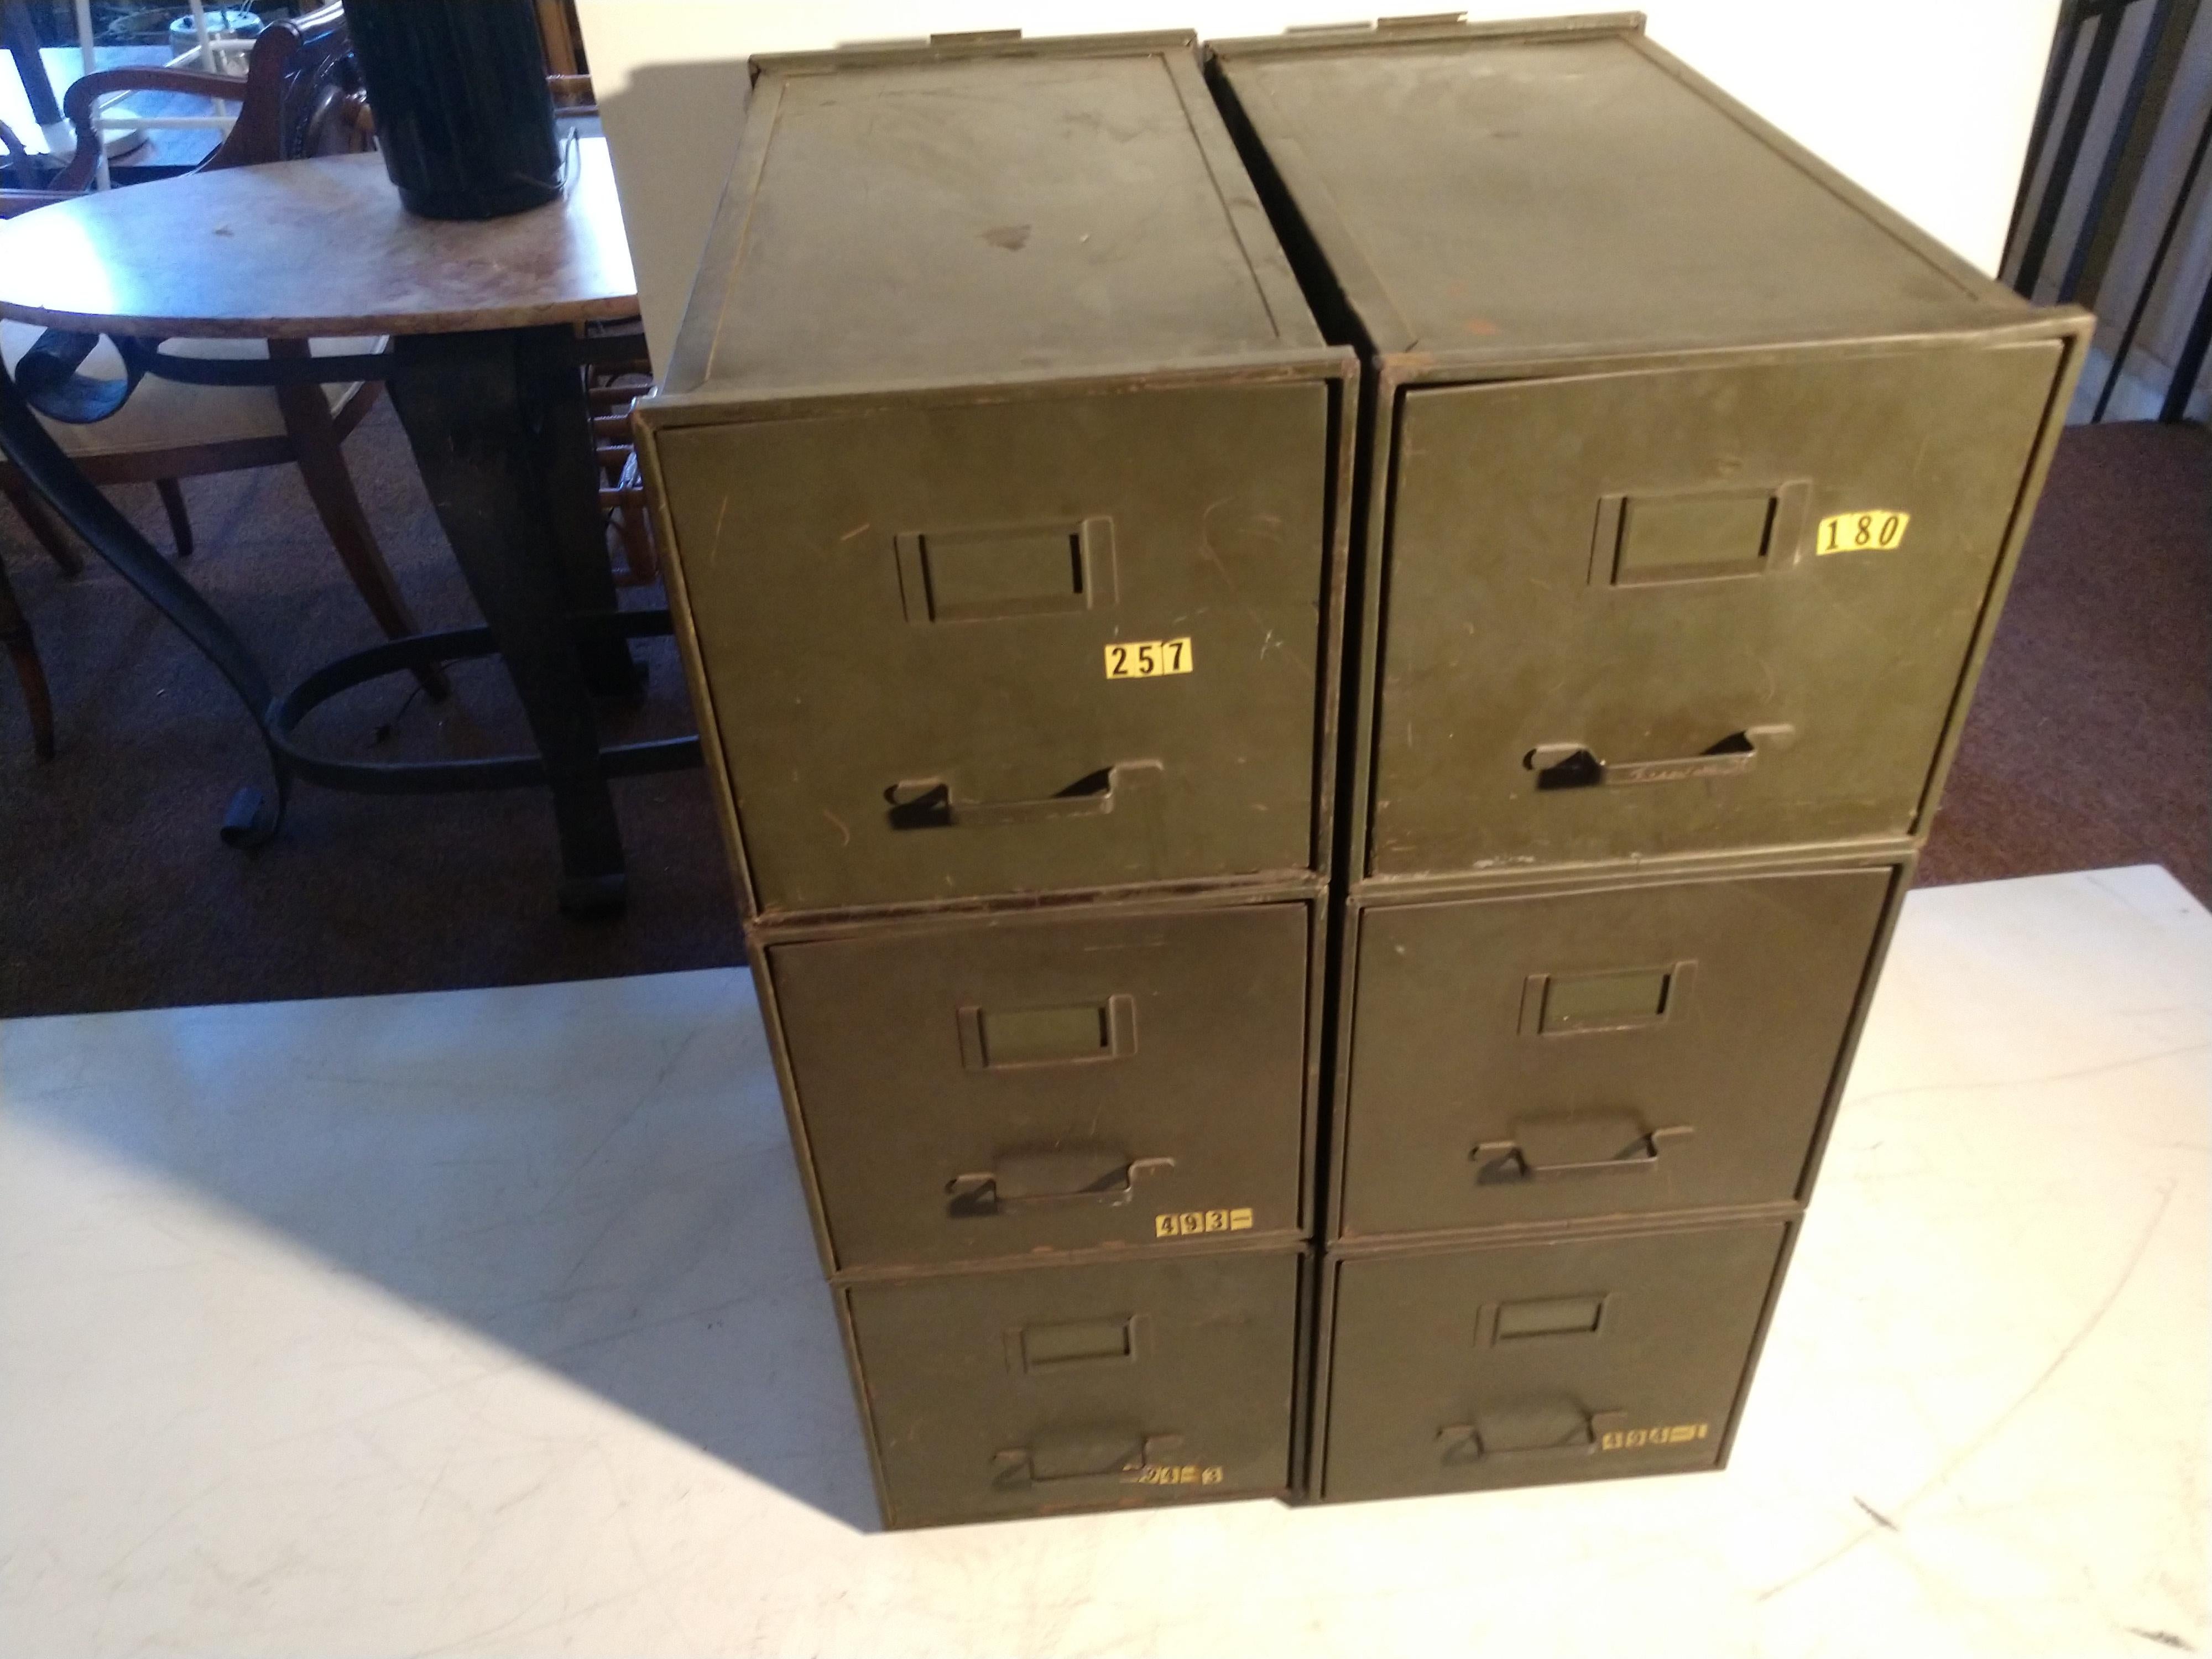 Stacking file cabinets which can be reconfigured in numerous ways. Each piece is 24.5 x 13 x 13. All in the original factory green. Great industrial look, can be used I kitchen, office, workshop etc.